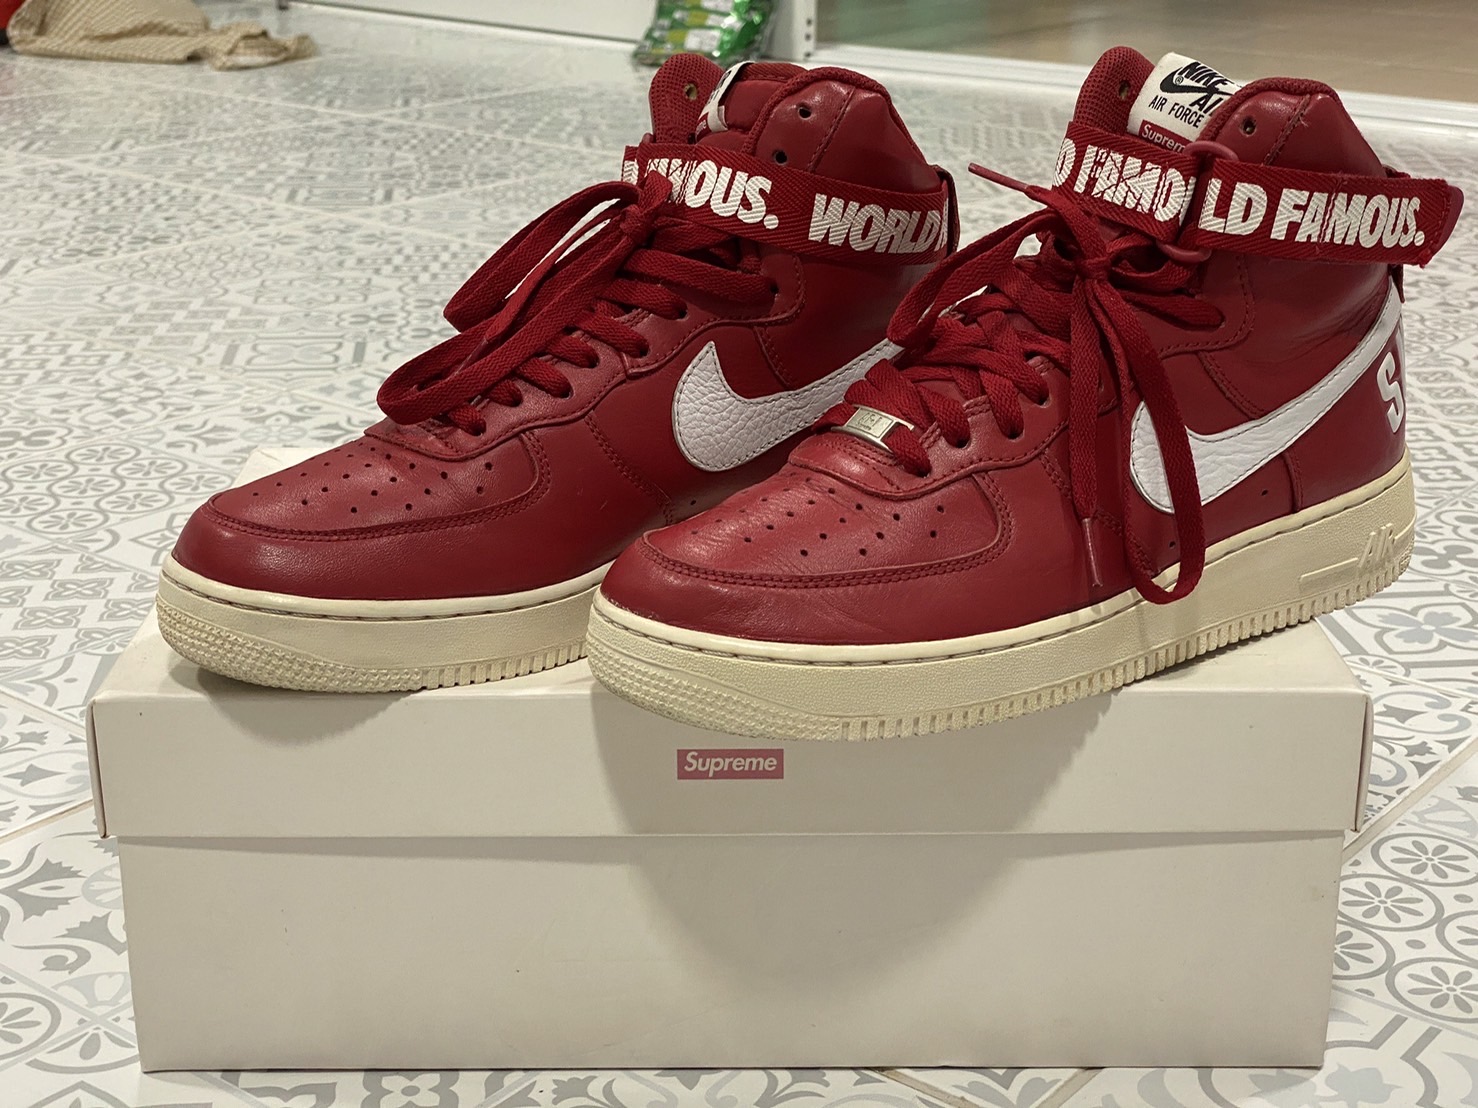 Nike Air Force 1 High Supreme World Famous Shoes 698696-610 Mens Size 12 Red